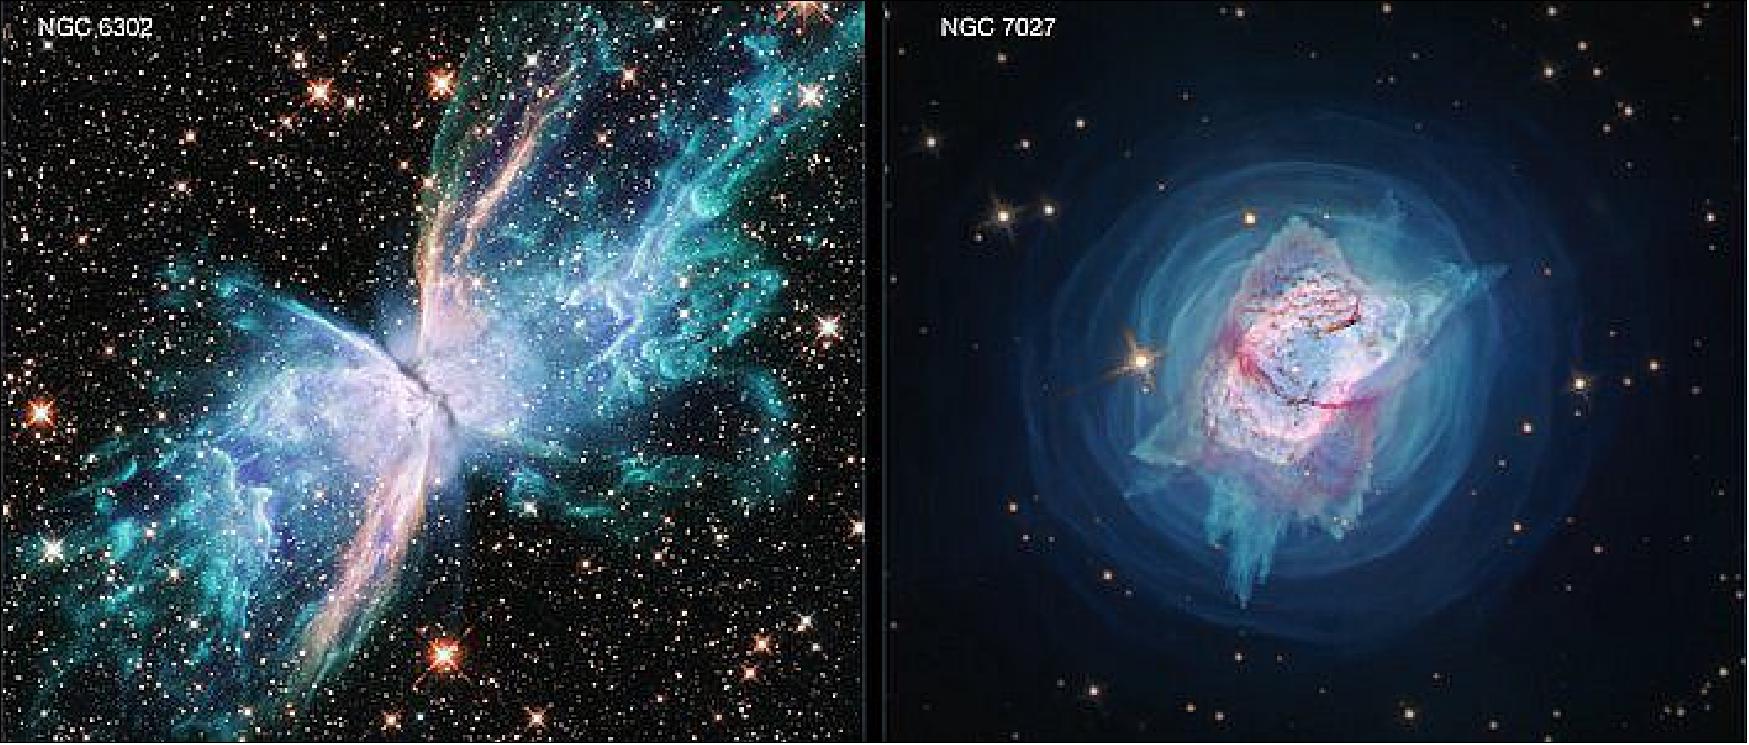 Figure 53: These two new images from the Hubble Space Telescope depict two nearby young planetary nebulae, NGC 6302, dubbed the Butterfly Nebula, and NGC 7027, which resembles a jewel bug. Both are among the dustiest planetary nebulae known and both contain unusually large masses of gas [image credit: NASA, ESA, and J. Kastner (RIT)]